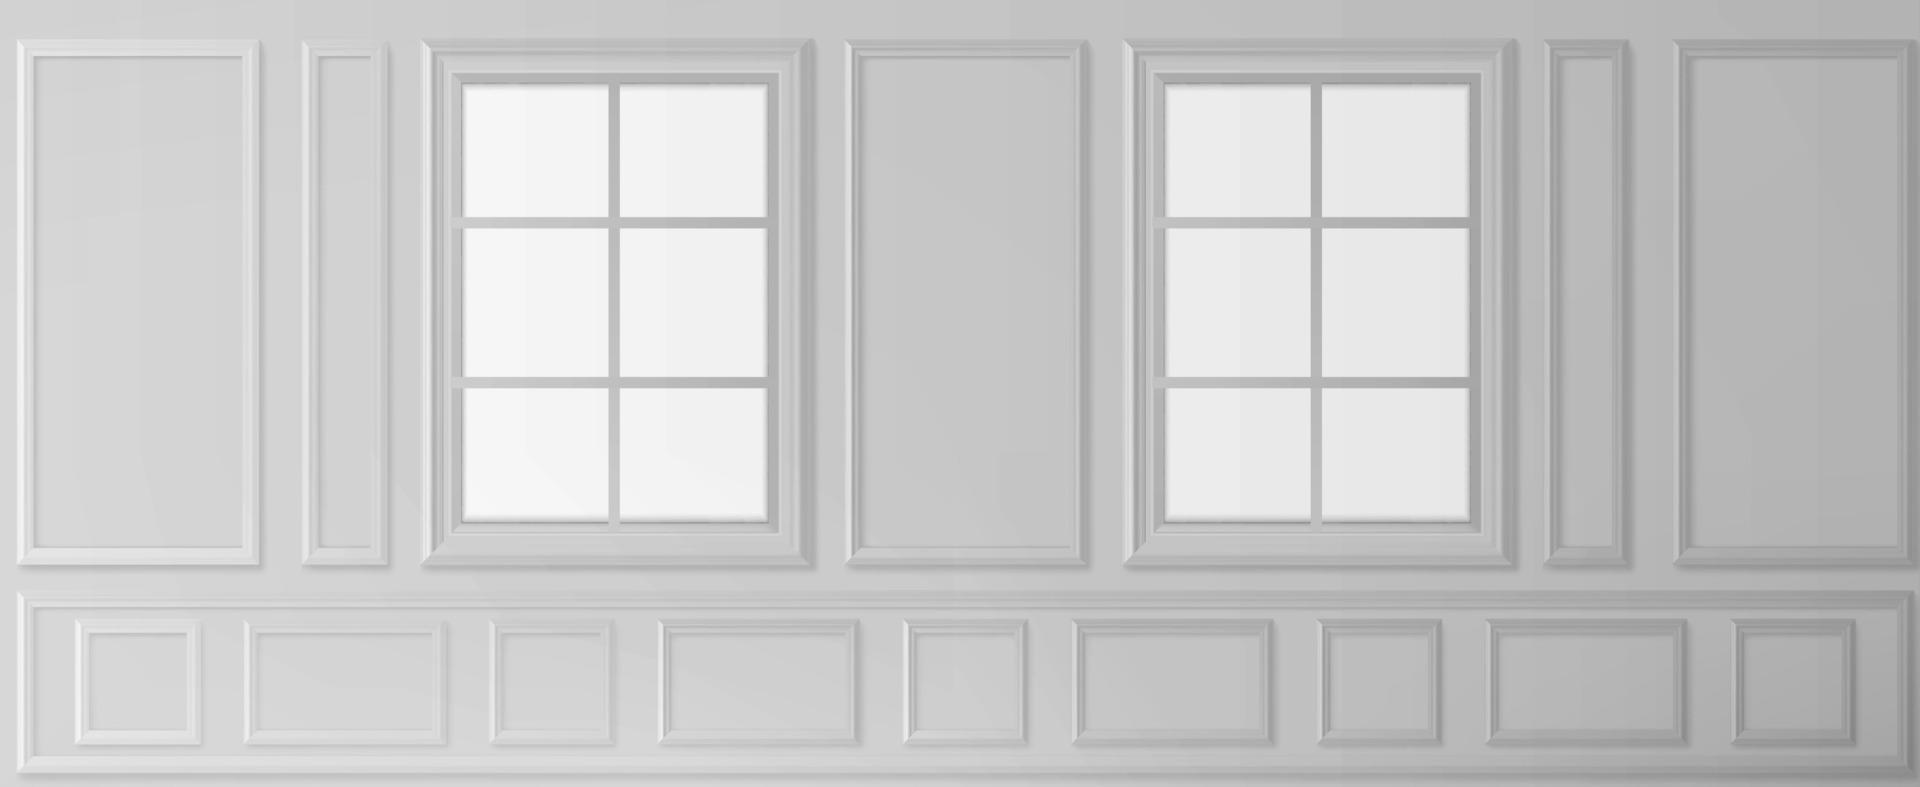 White wall with windows in luxury victorian style vector